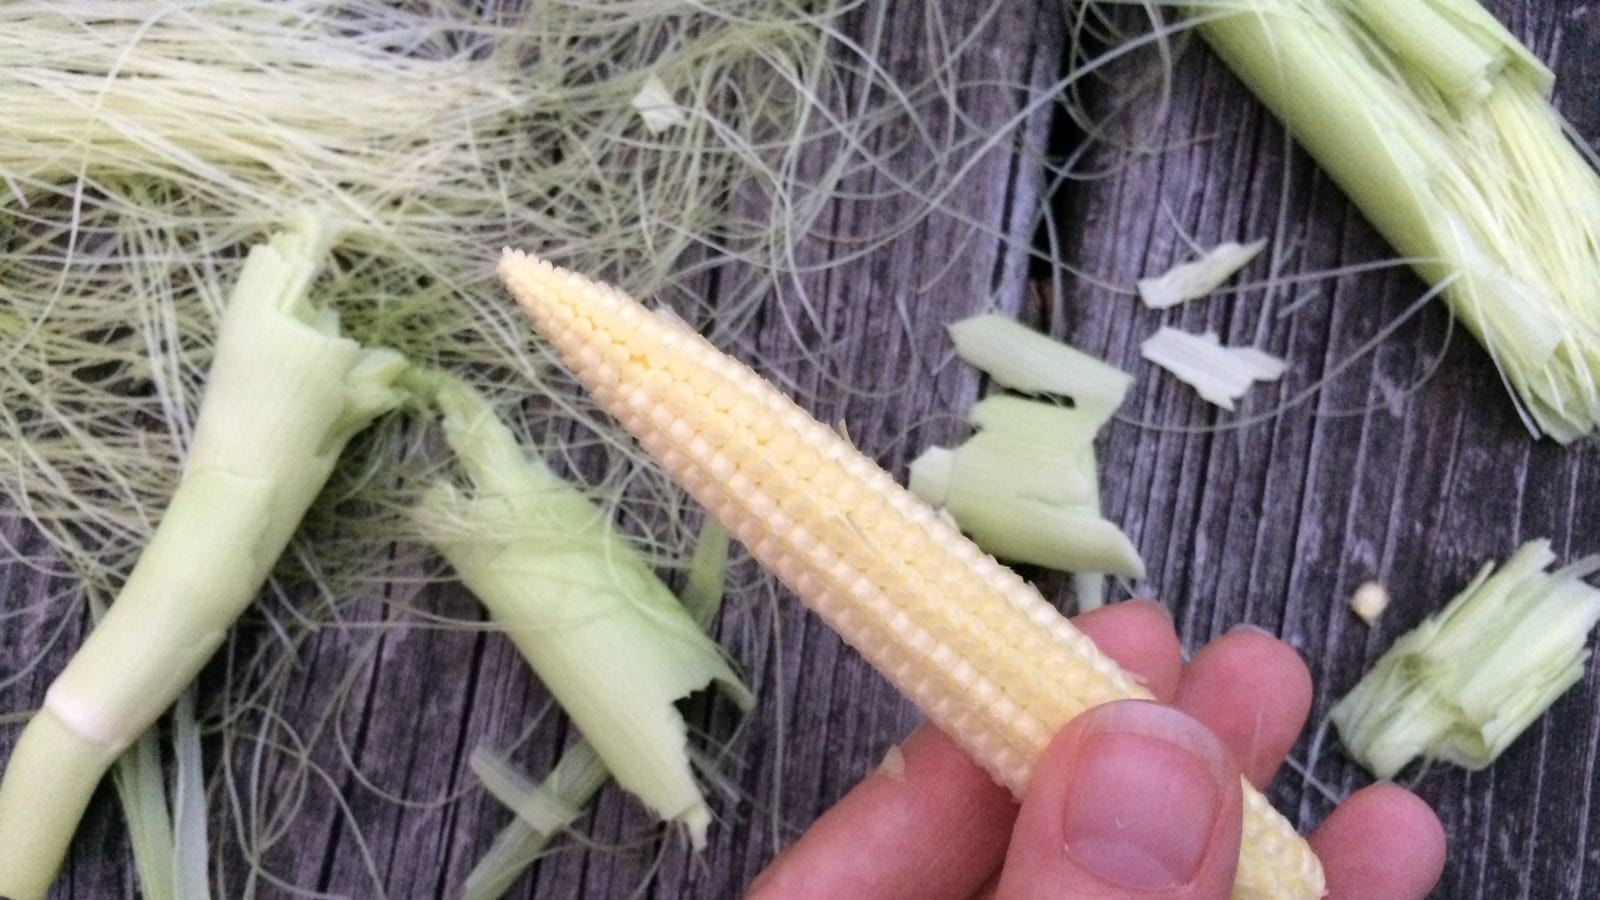 Baby Corn Is a Real Vegetable You Can Grow